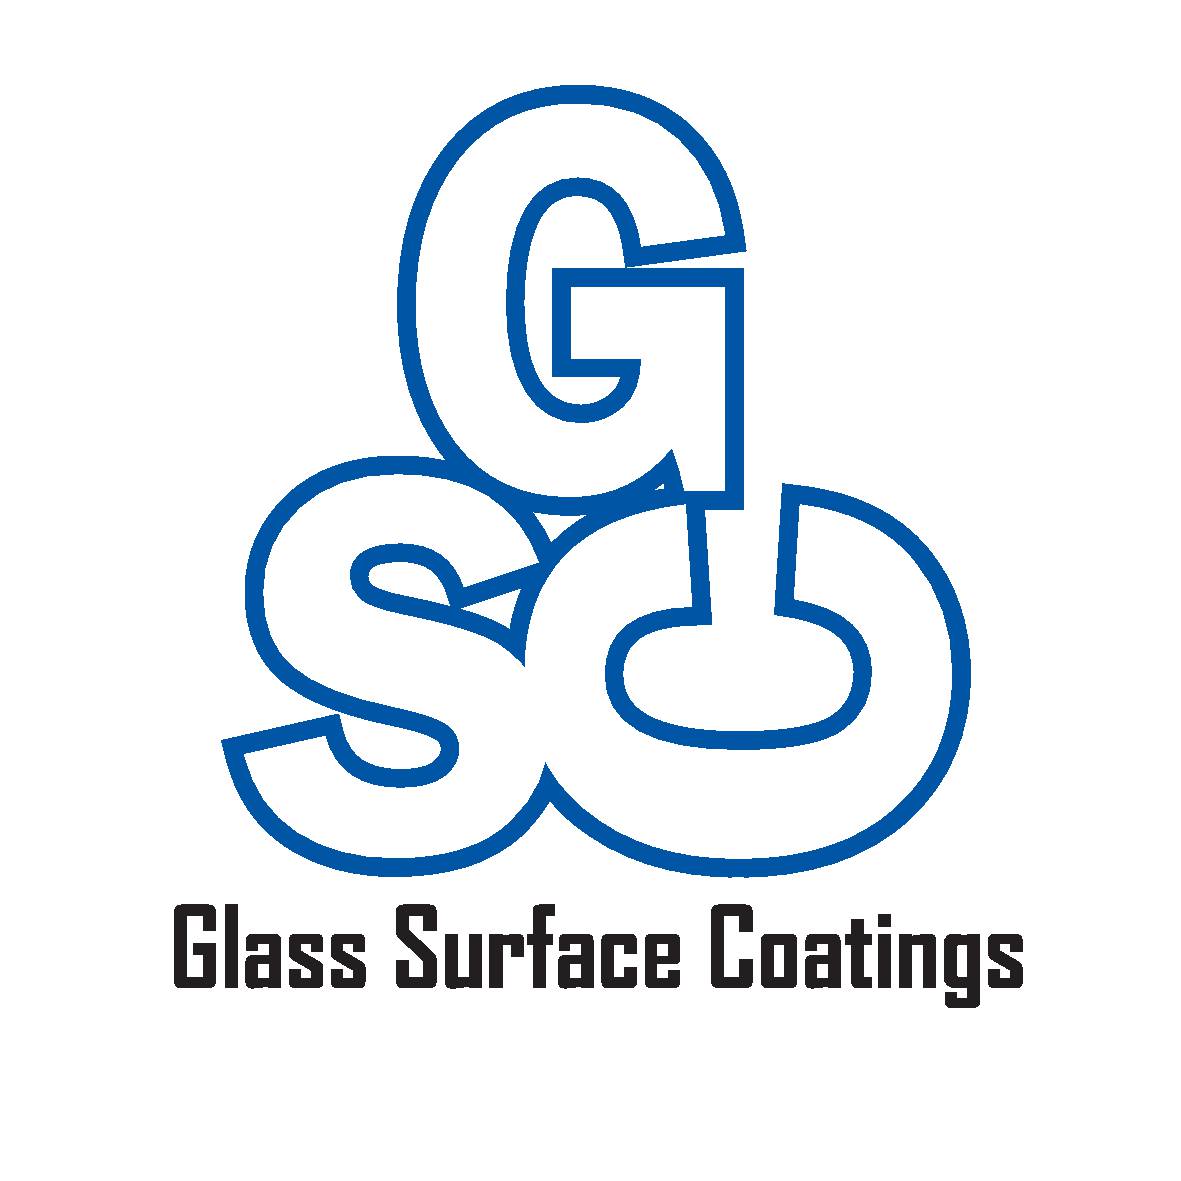 Glass Surface Coatings